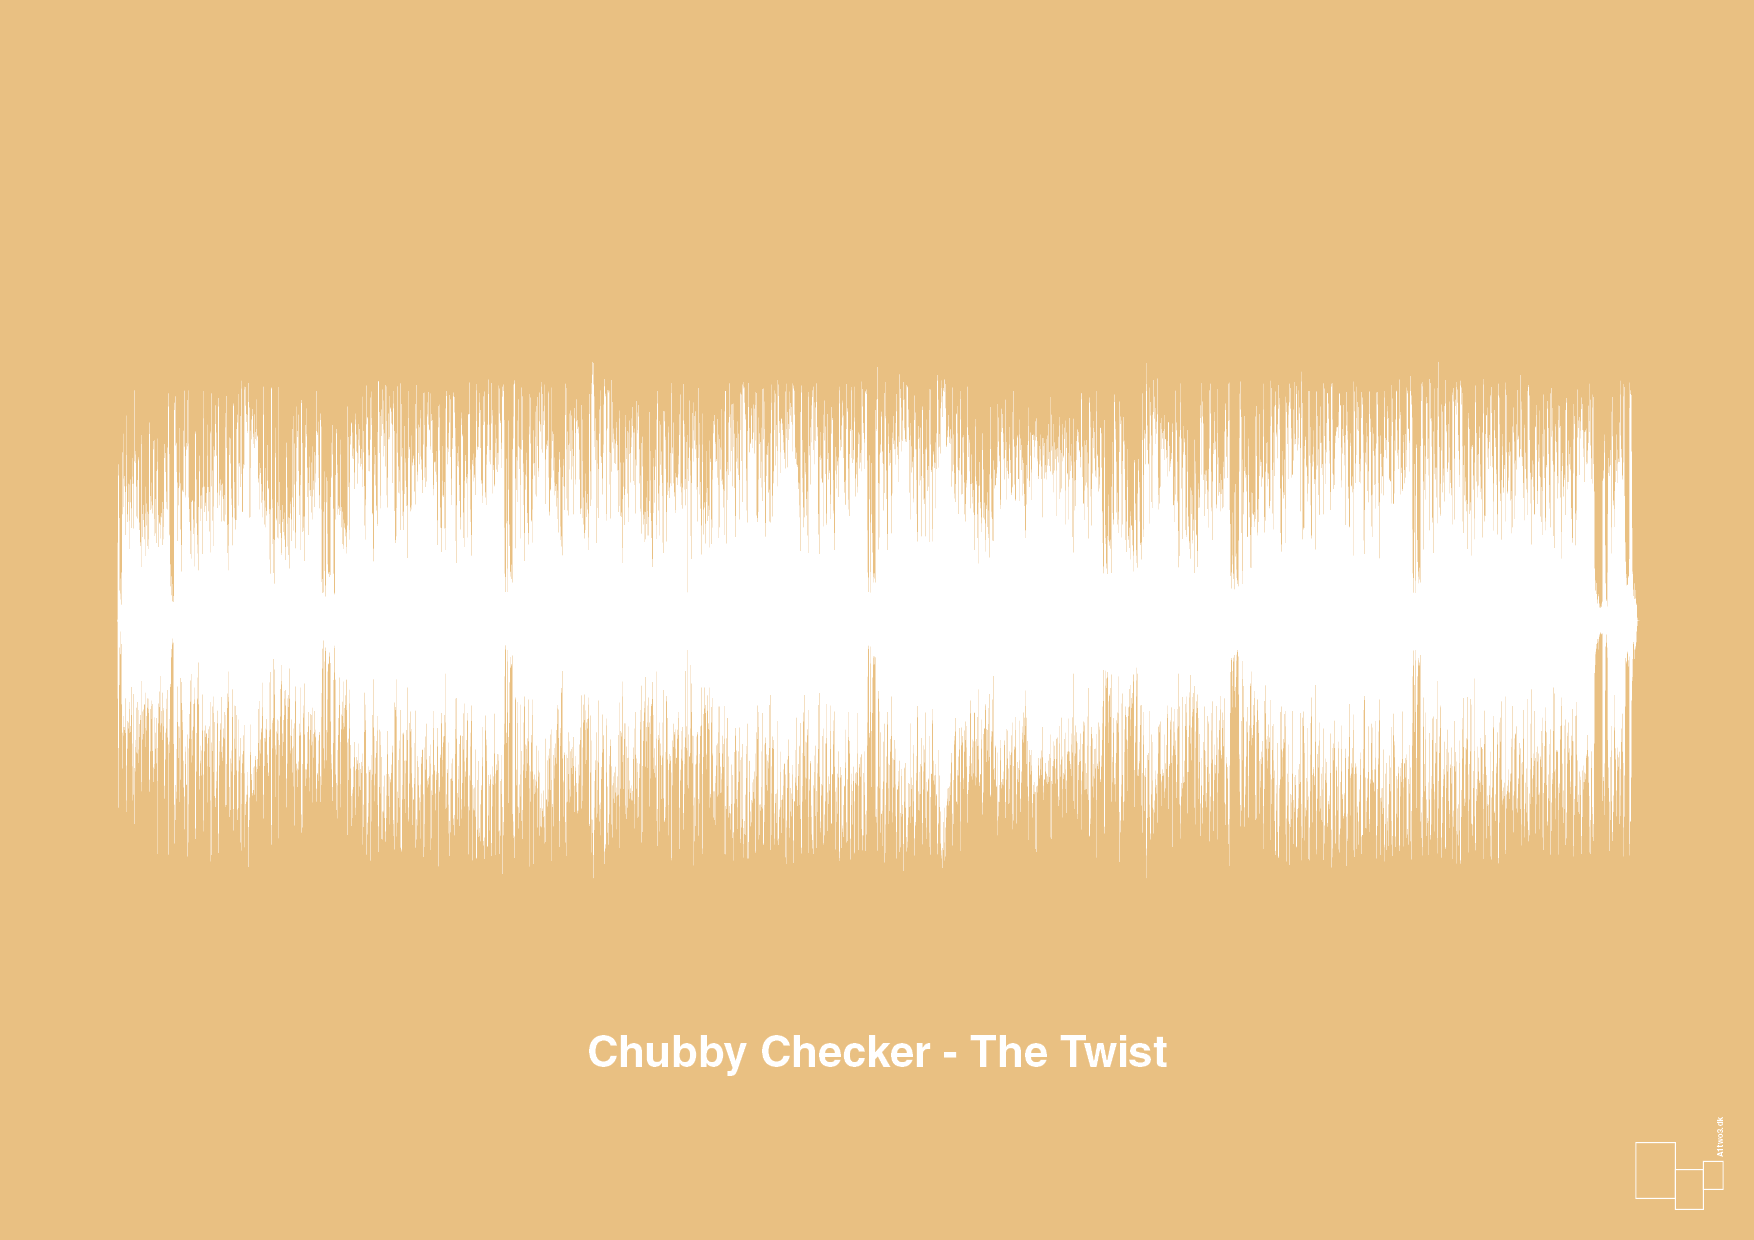 chubby checker - the twist - Plakat med Musik i Charismatic